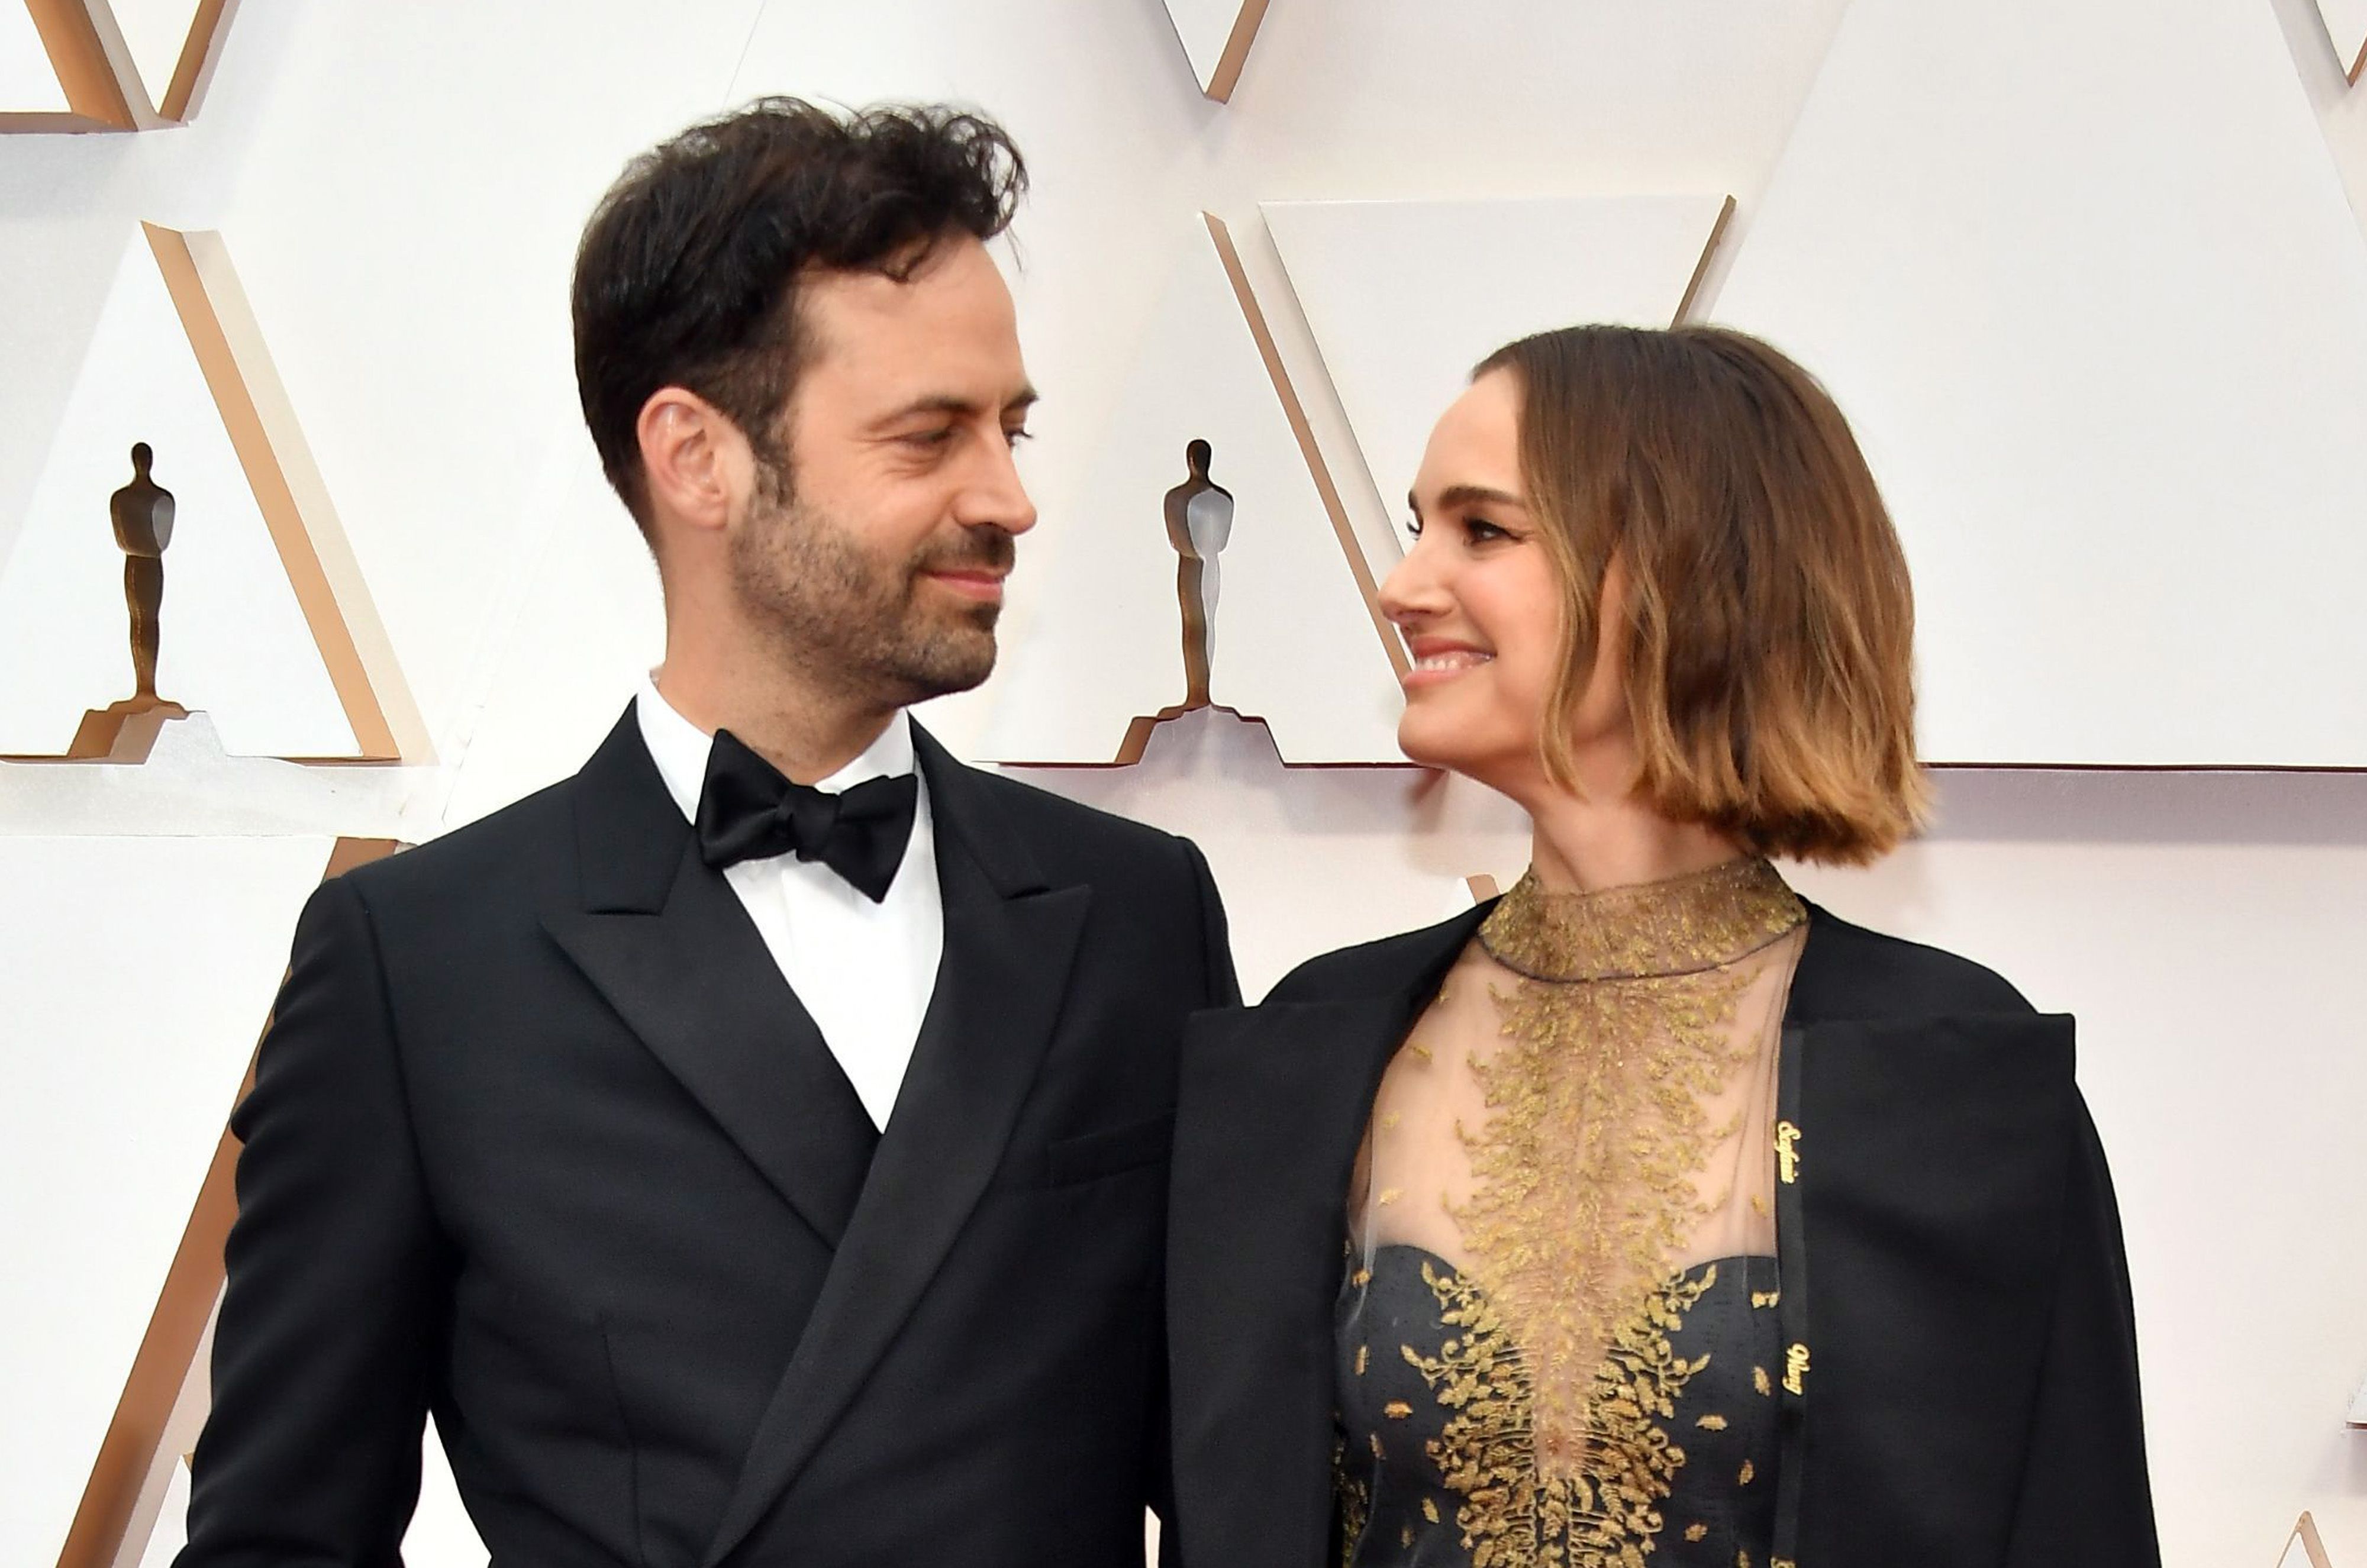 Benjamin Millepied and Natalie Portman in Hollywood, California on February 9, 2020 | Source: Getty Images